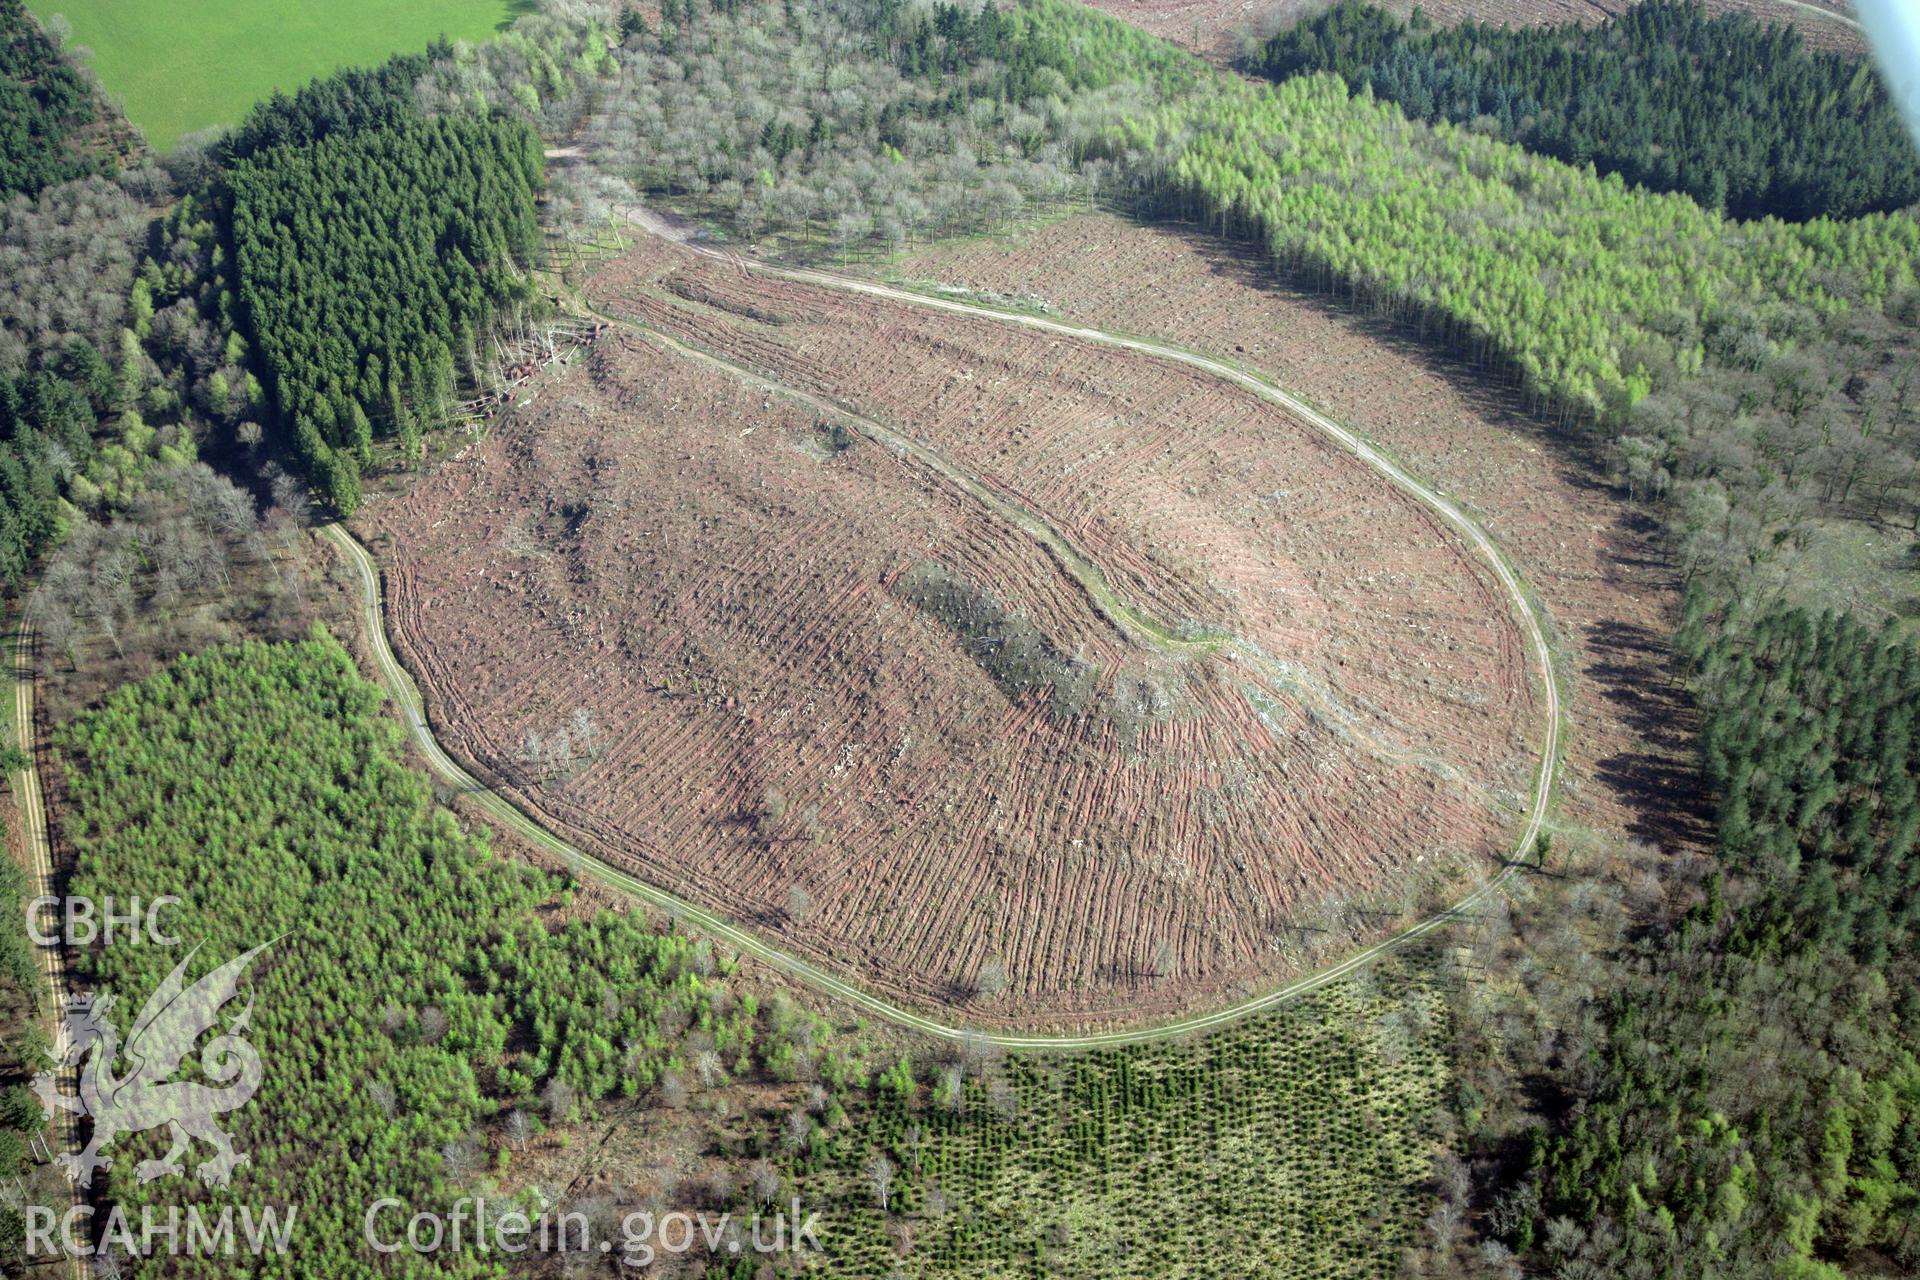 RCAHMW colour oblique photograph of Ysgyryd Fach, Little Skirrid defended enclosure. Taken by Toby Driver and Oliver Davies on 28/03/2012.